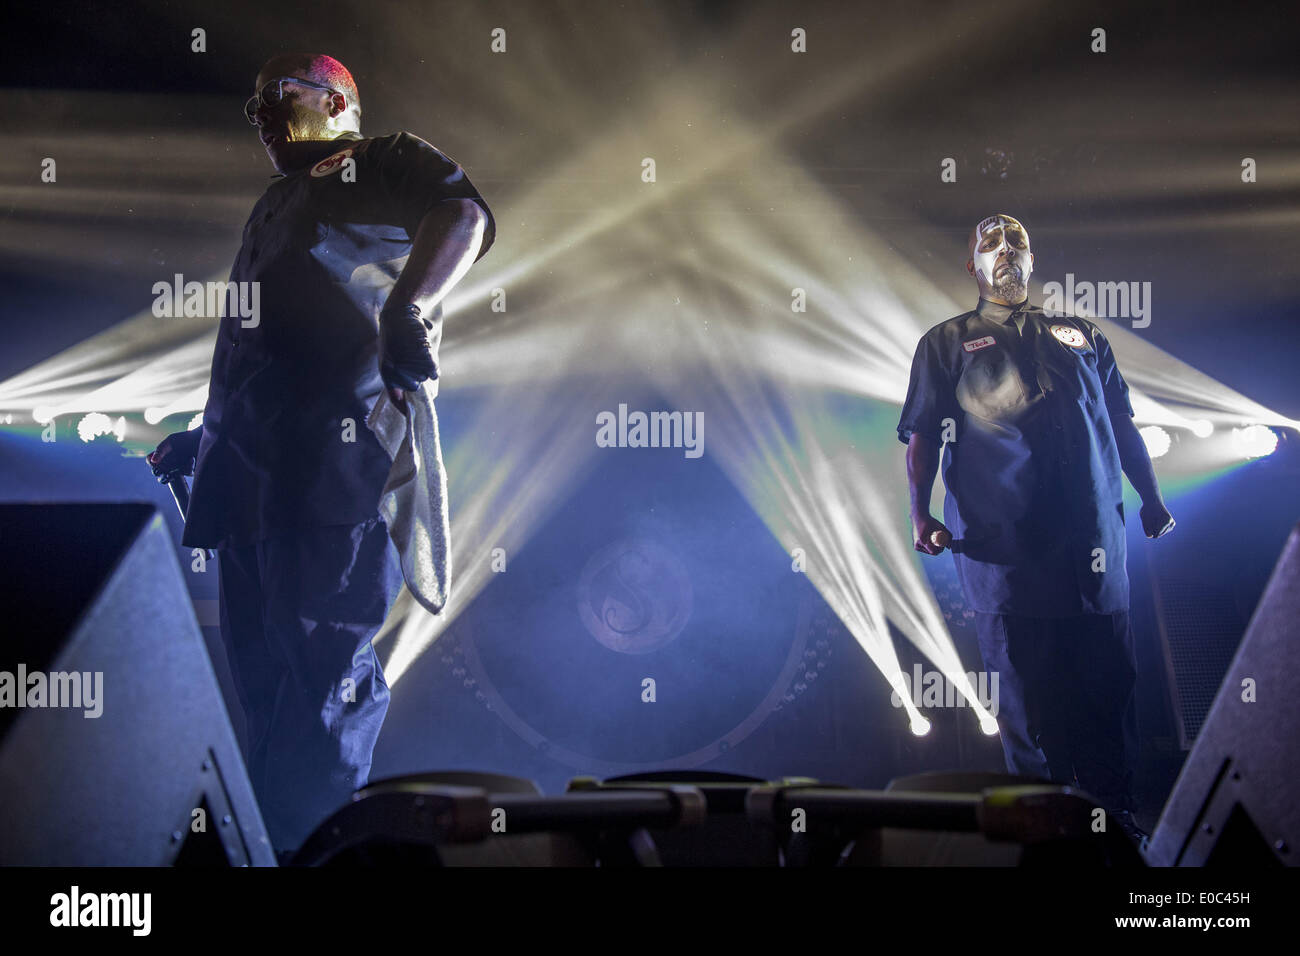 Milwaukee, Wisconsin, USA. 7th May, 2014. Rappers KRIZZ KALICO (L) and TECH N9NE perform live on the Independent Grind tour at The Rave in Milwaukee, Wisconsin © Daniel DeSlover/ZUMAPRESS.com/Alamy Live News Stock Photo